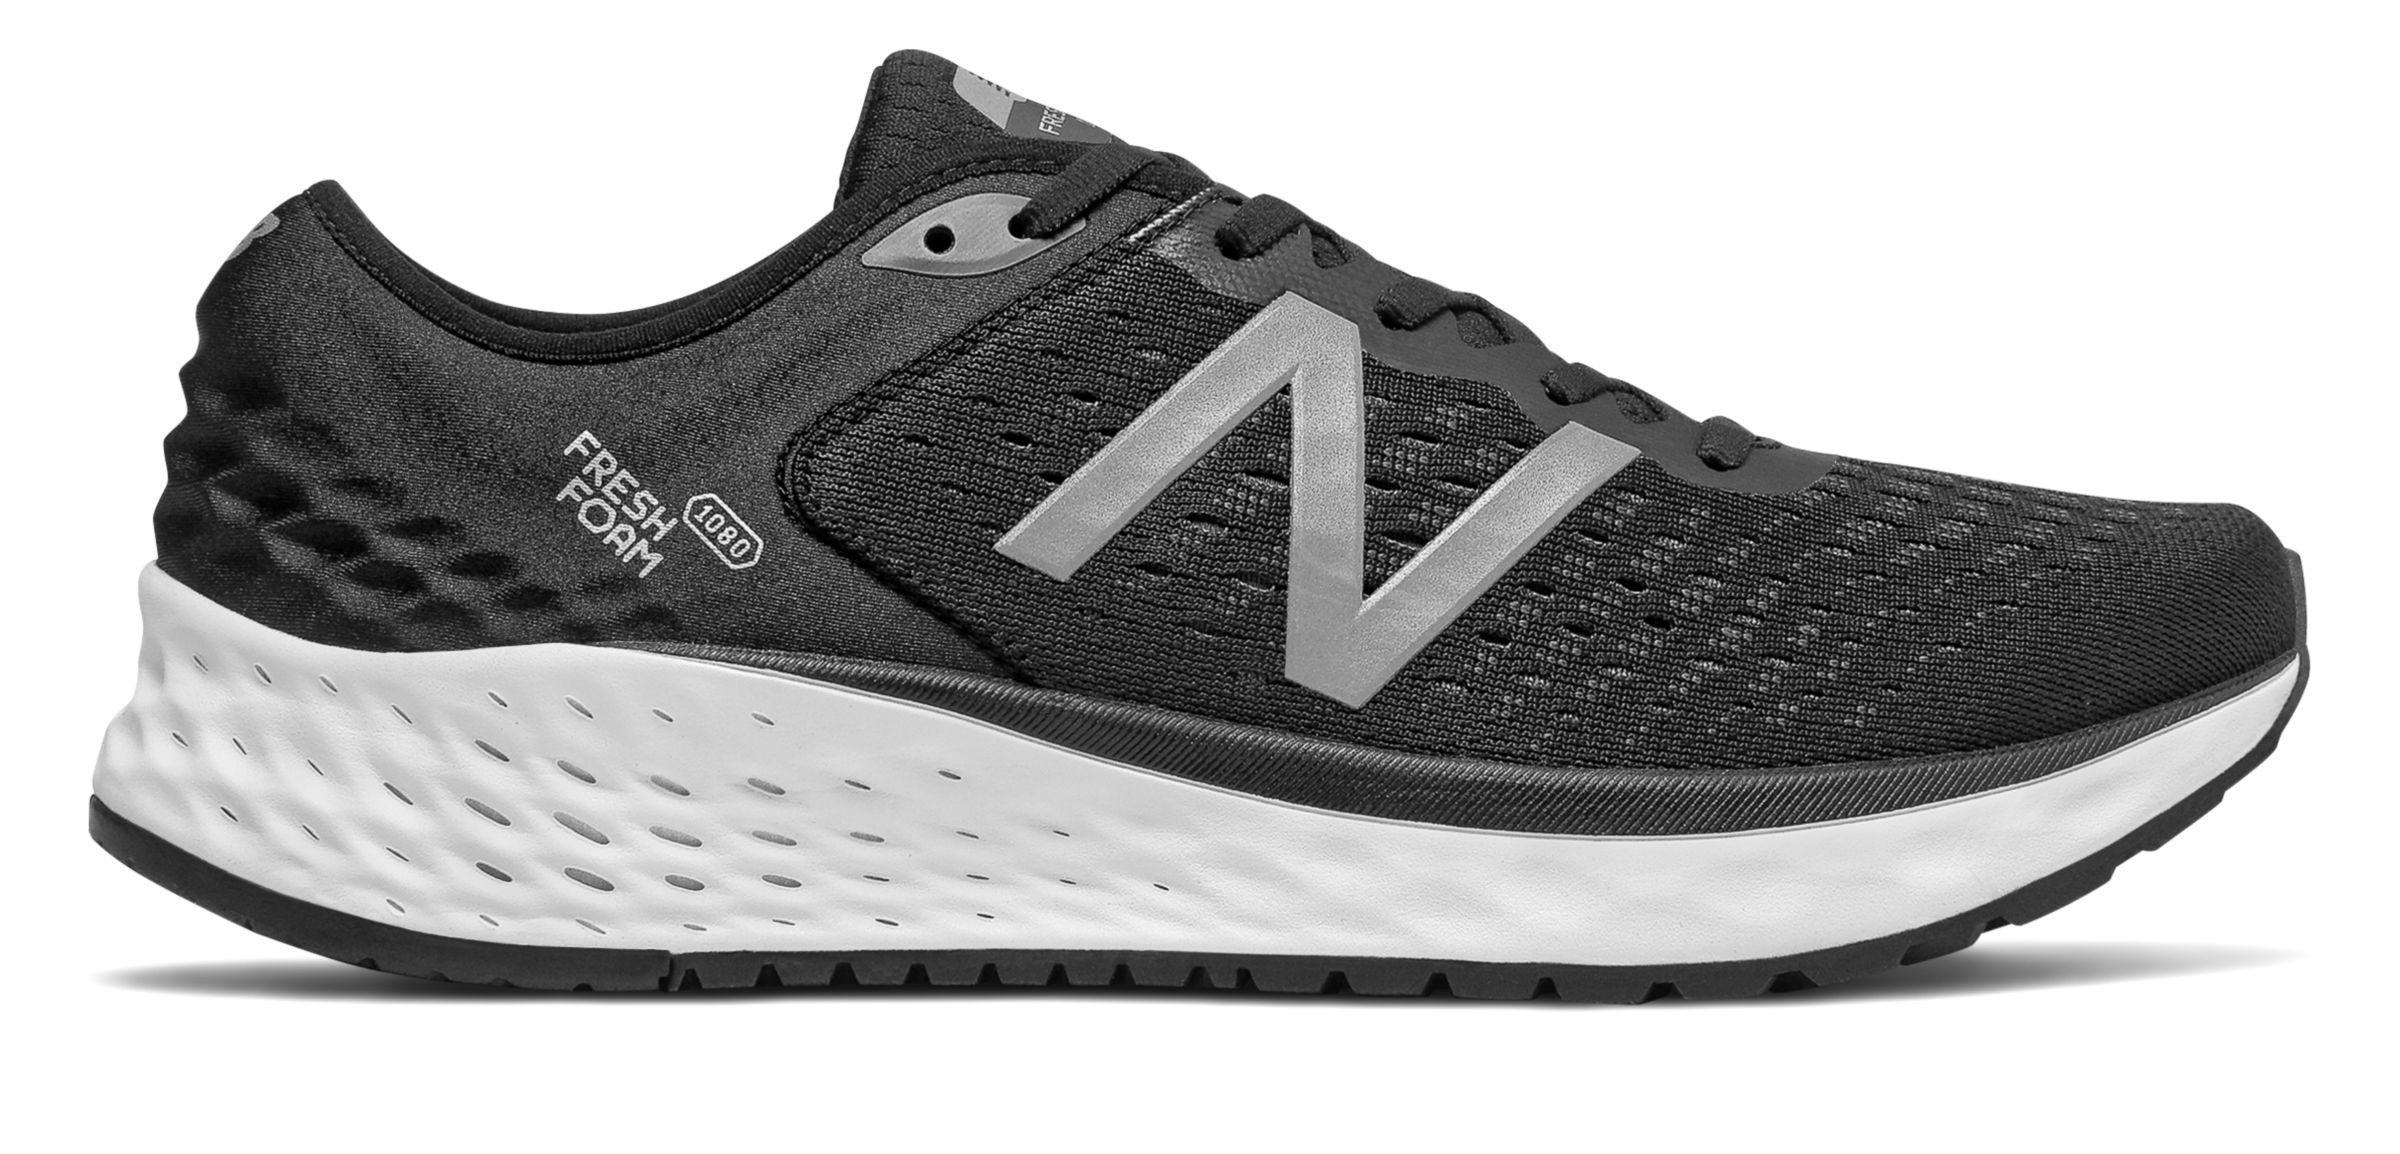 good new balance running shoes,Save up to 17%,www.ilcascinone.com